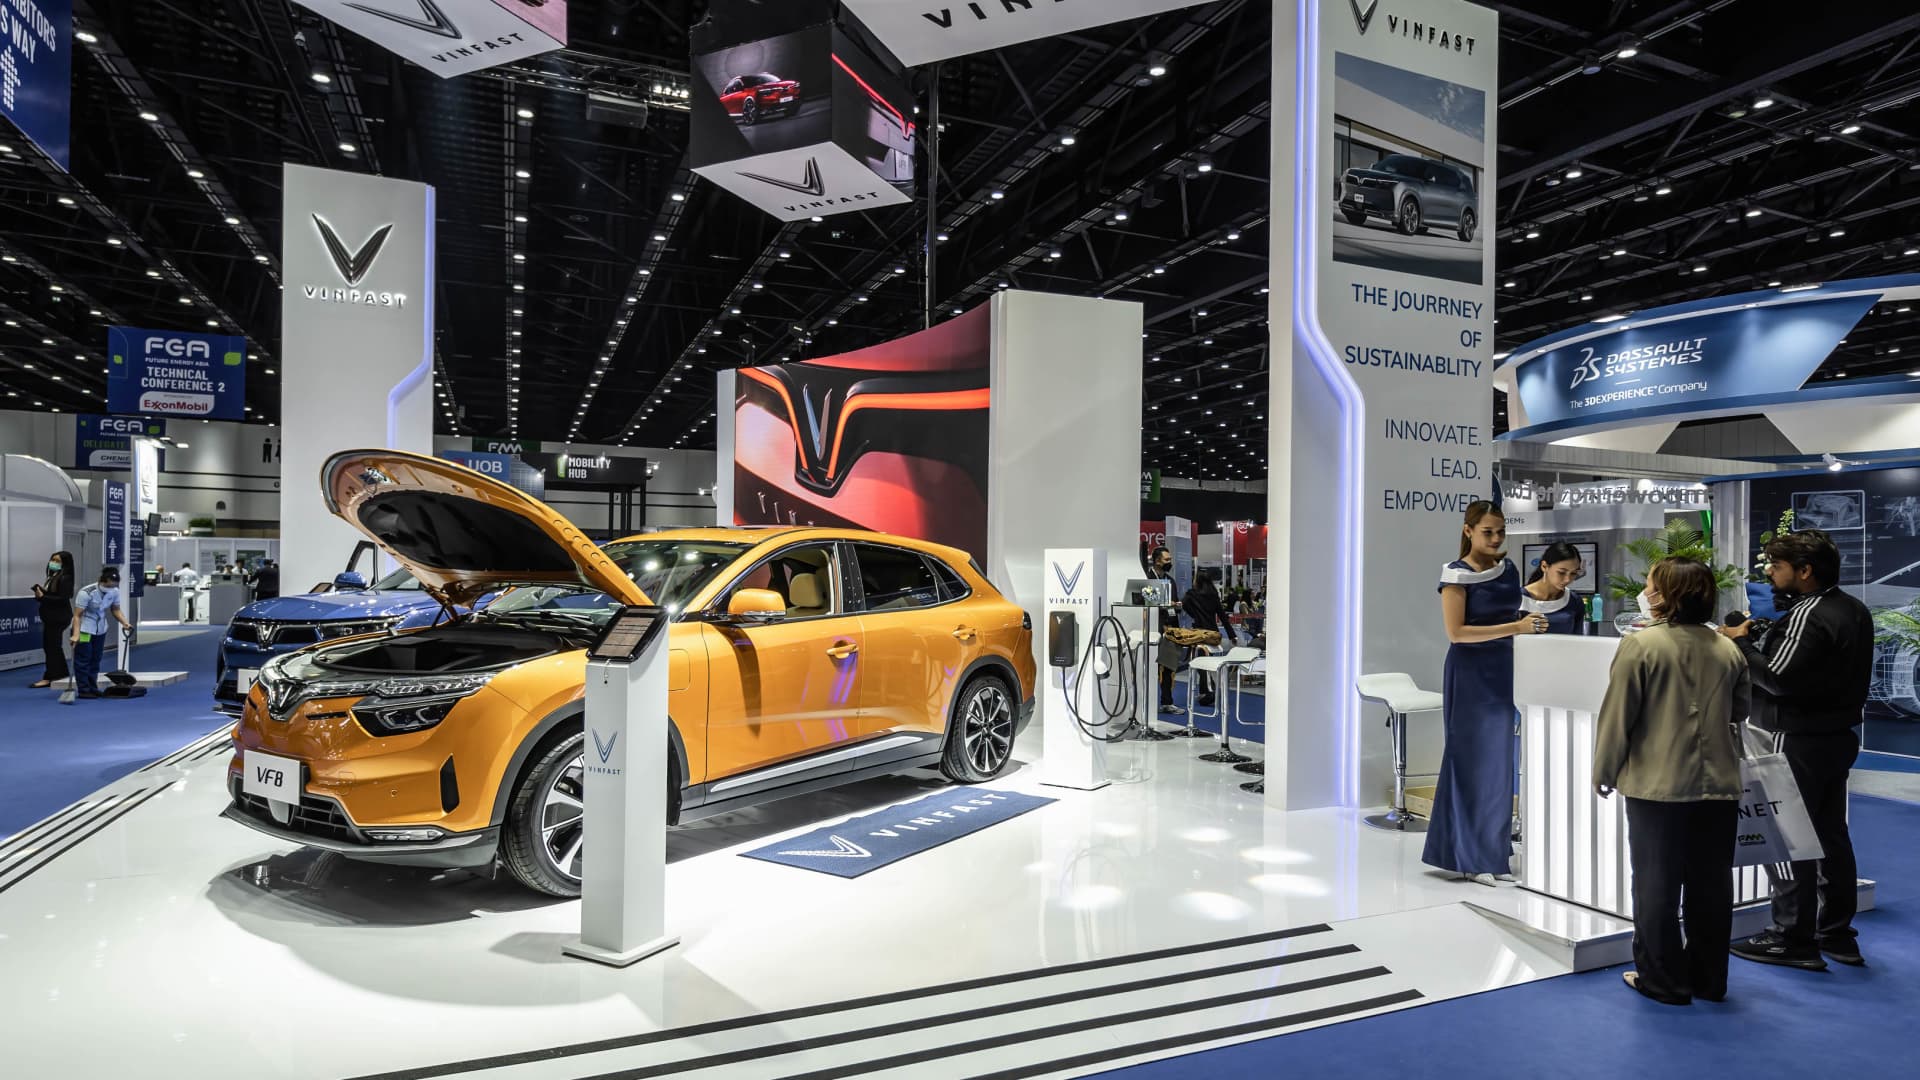 Vietnamese EV maker VinFast is now worth more than Ford and GM after Nasdaq debut